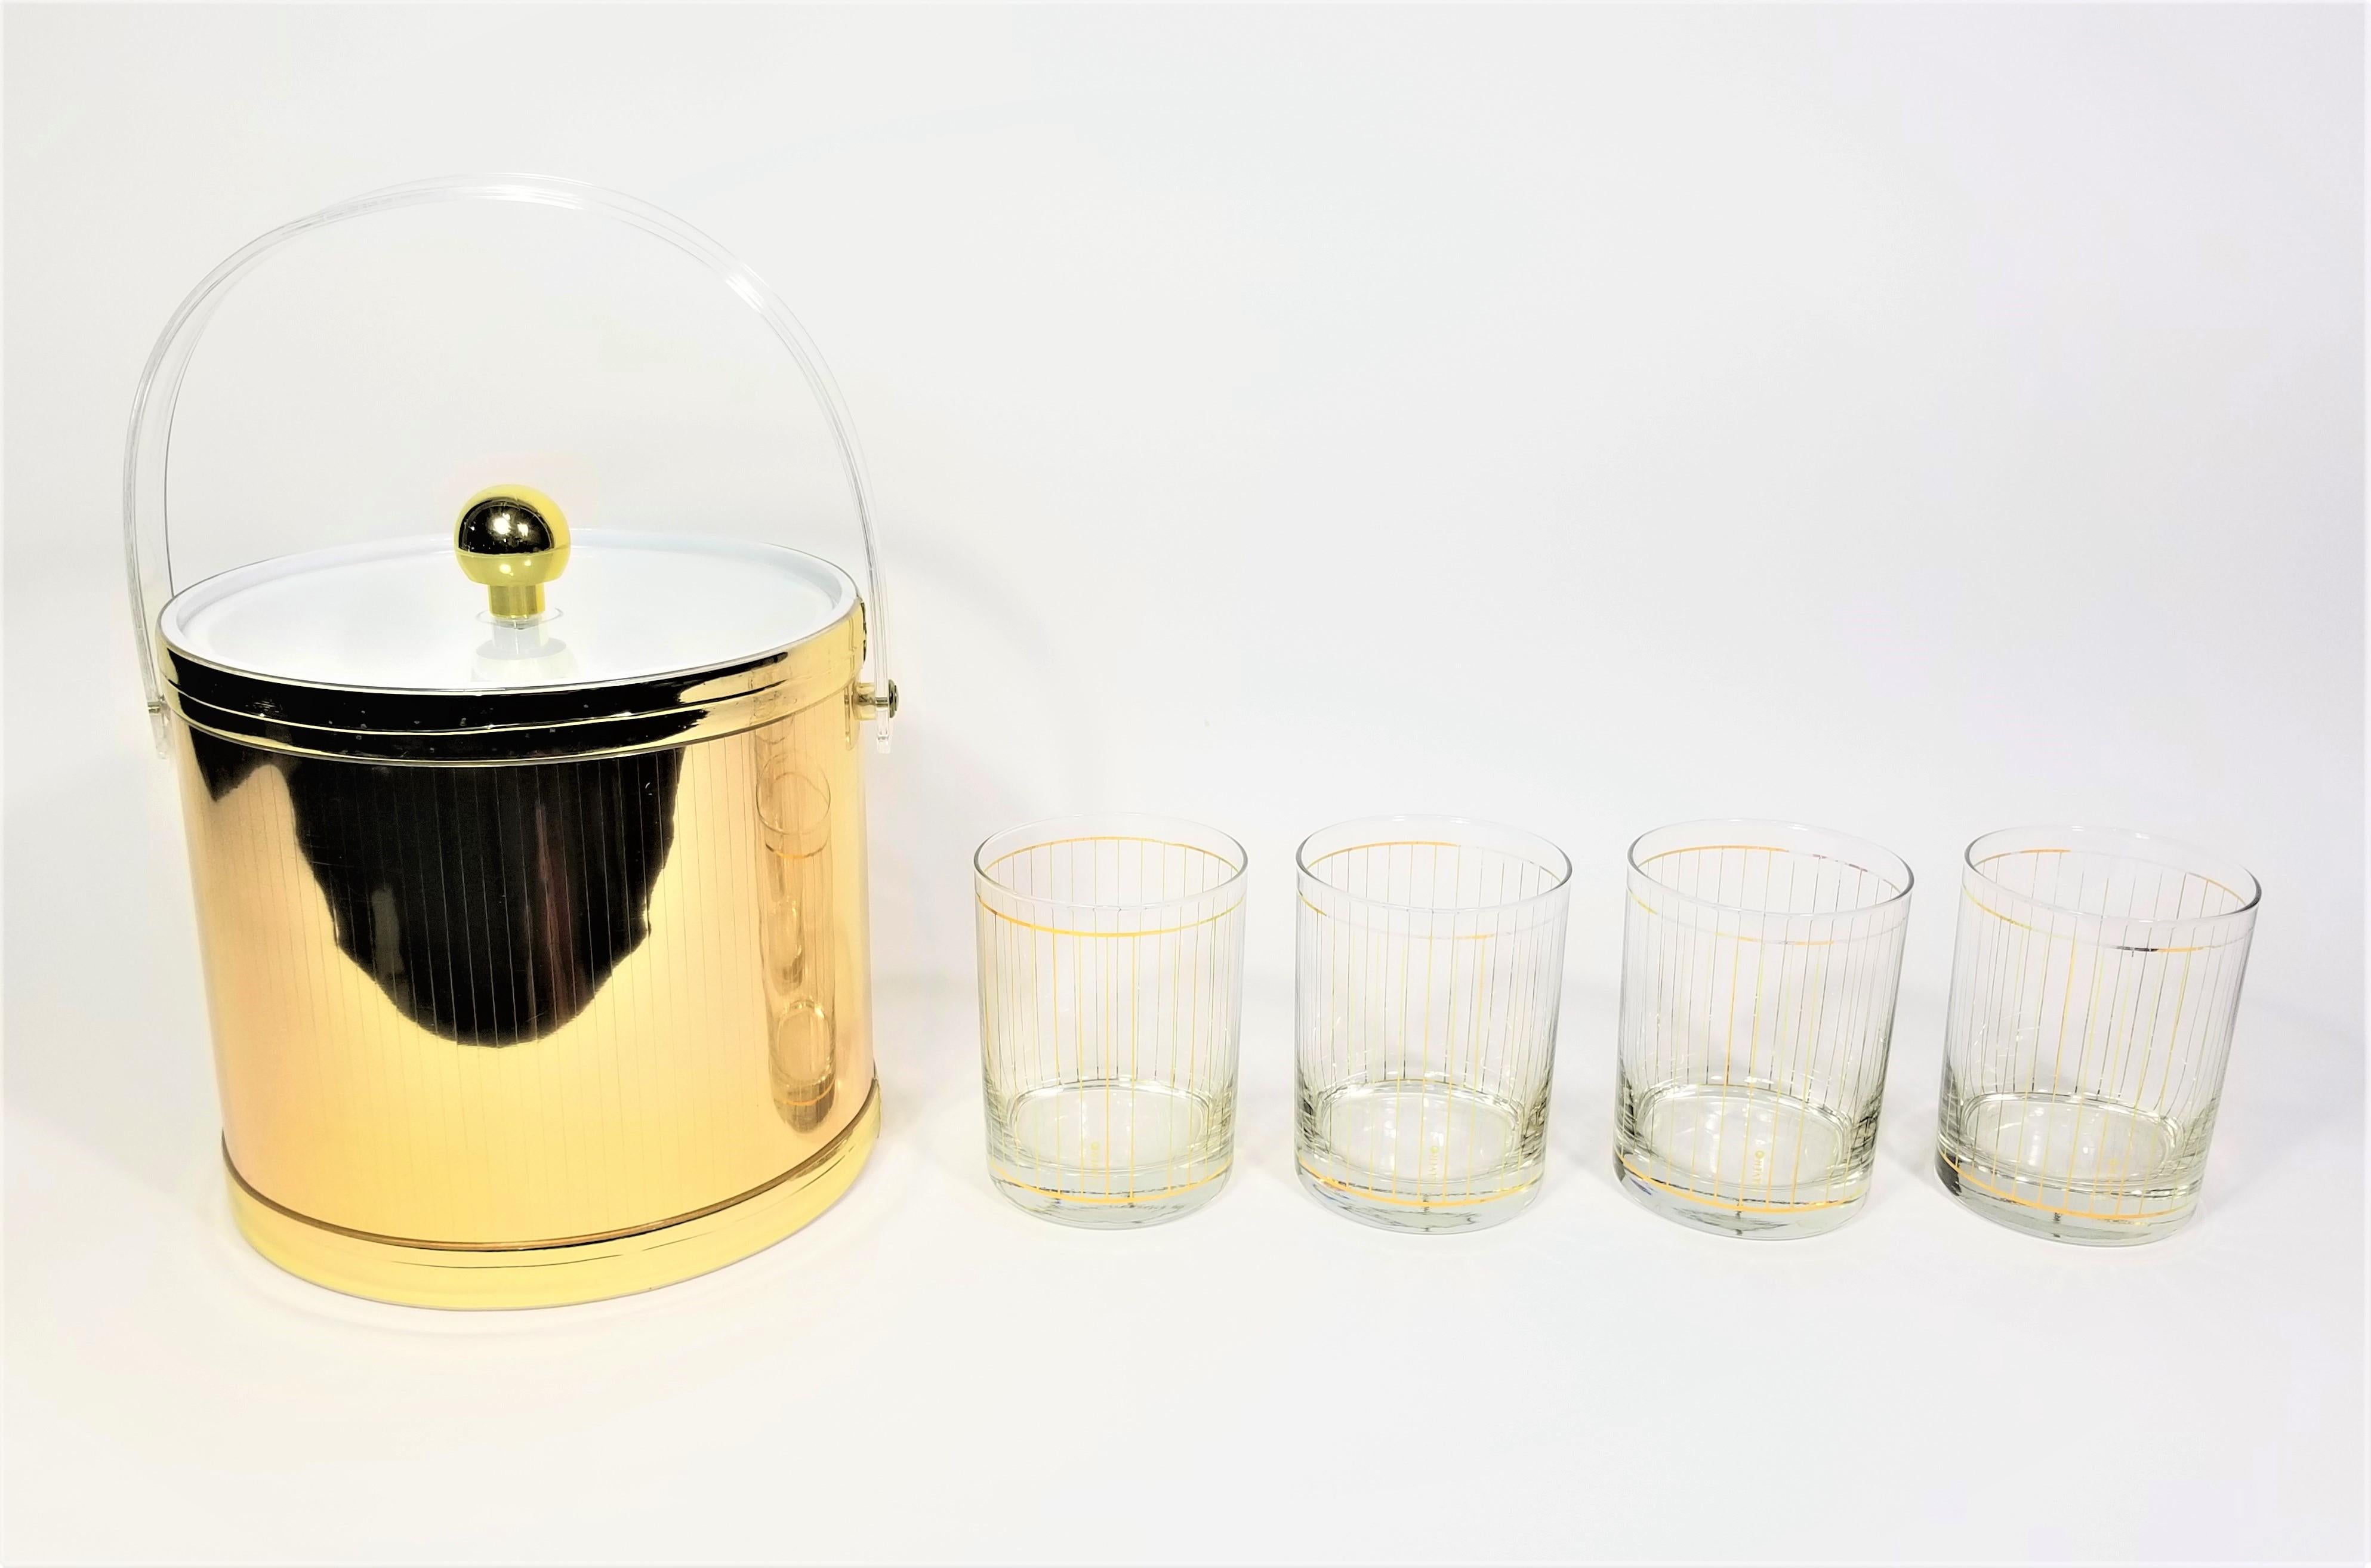 Mid century 1970s Culver 22K set of 4 double old fashioned glasses with gold ice bucket. All glasses marked Culver. 
Some light wear to gold detail on glasses. Original Box included.

Box height: 12.25 inches
Box width: 8.5 inches
Box depth: 8.5